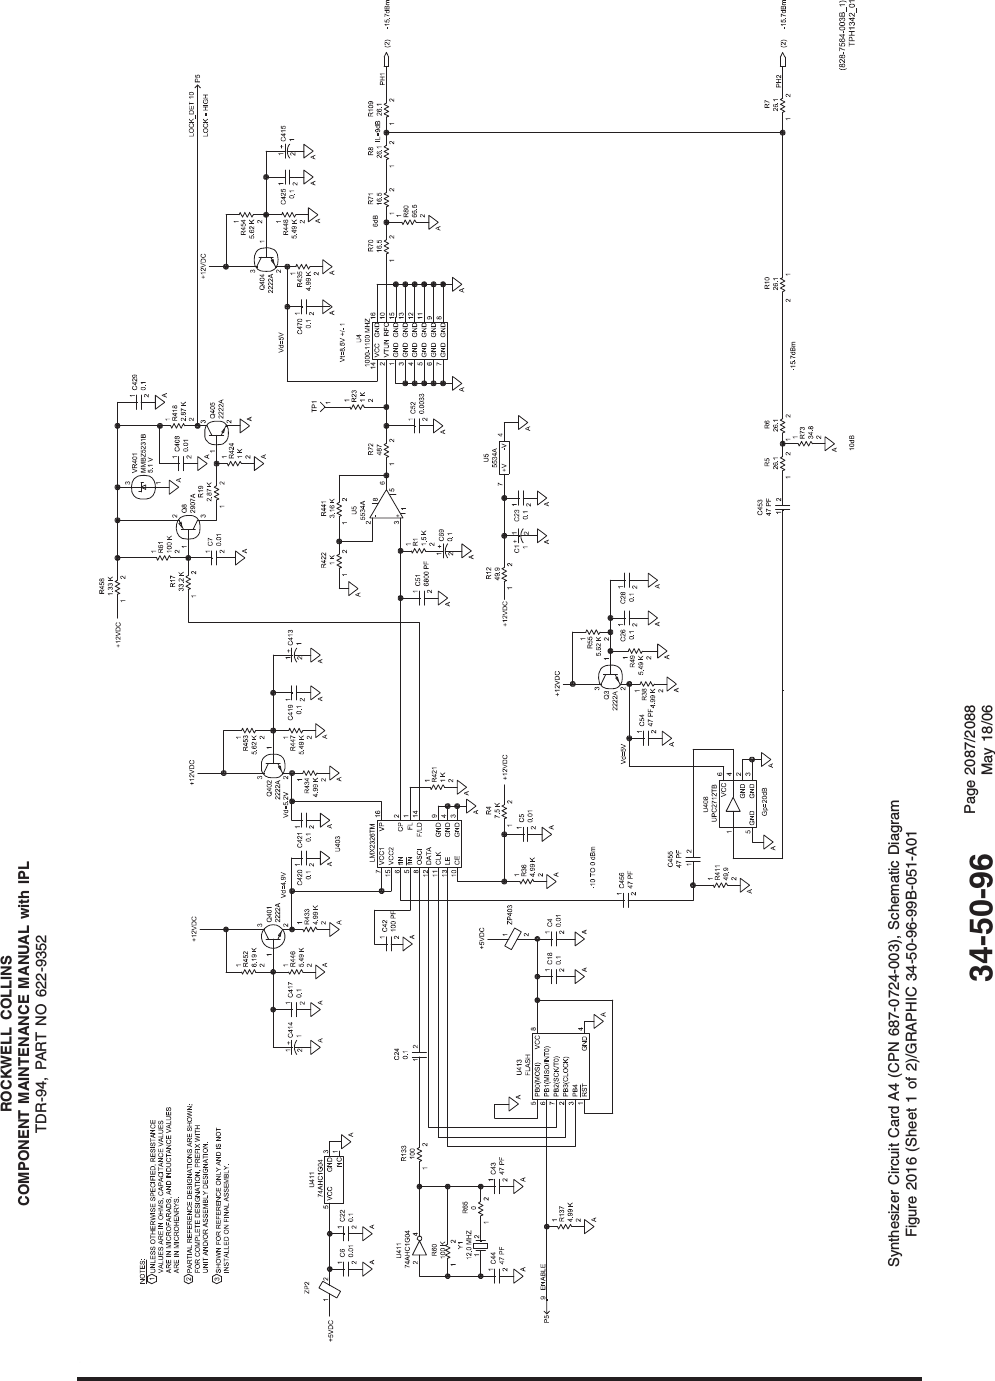 ROCKWELL COLLINSCOMPONENT MAINTENANCE MANUAL with IPLTDR-94, PART NO 622-9352Synthesizer Circuit Card A4 (CPN 687-0724-003), Schematic DiagramFigure 2016 (Sheet 1 of 2)/GRAPHIC 34-50-96-99B-051-A0134-50-96 Page 2087/2088May 18/06